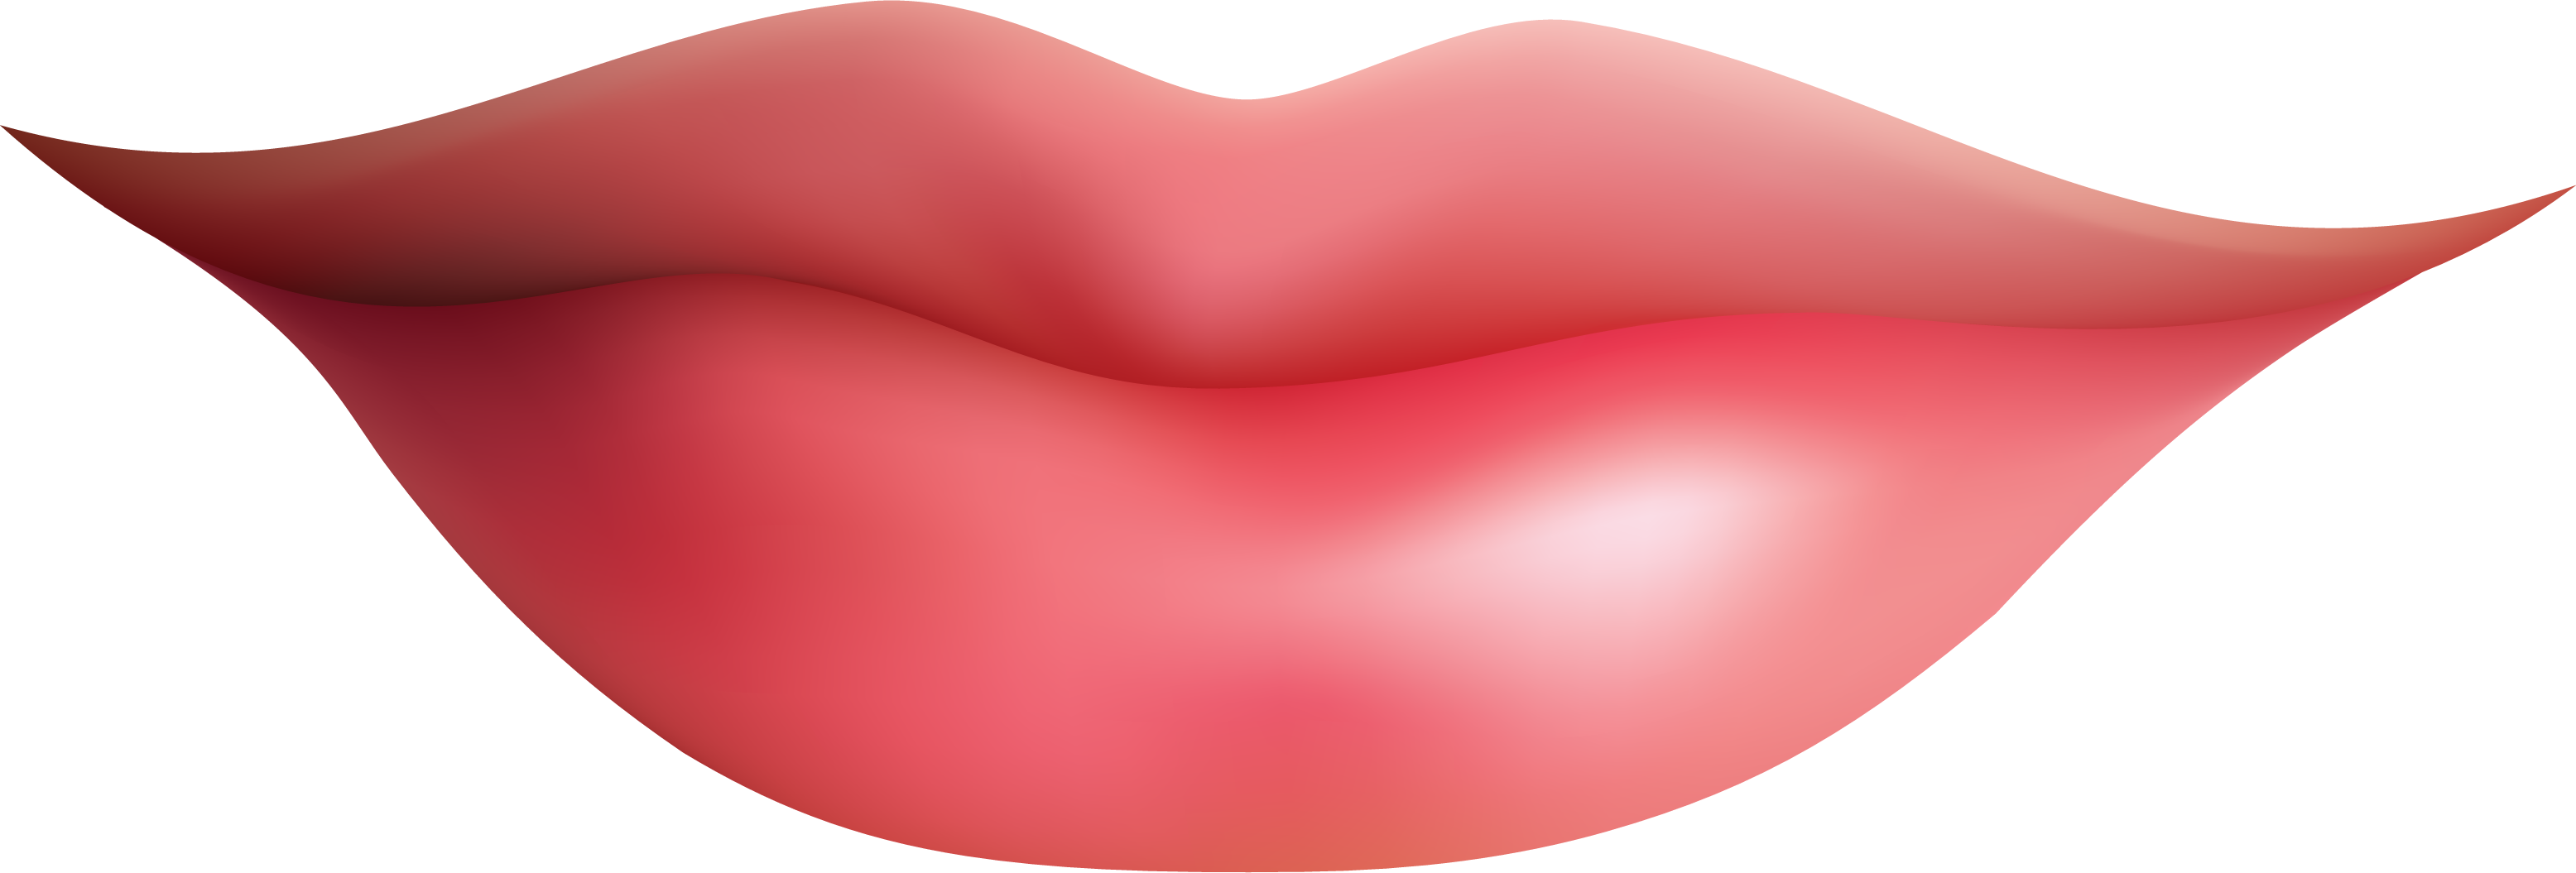 Free Lips Clip Art Download Free Lips Clip Art Png Images Free Cliparts On Clipart Library